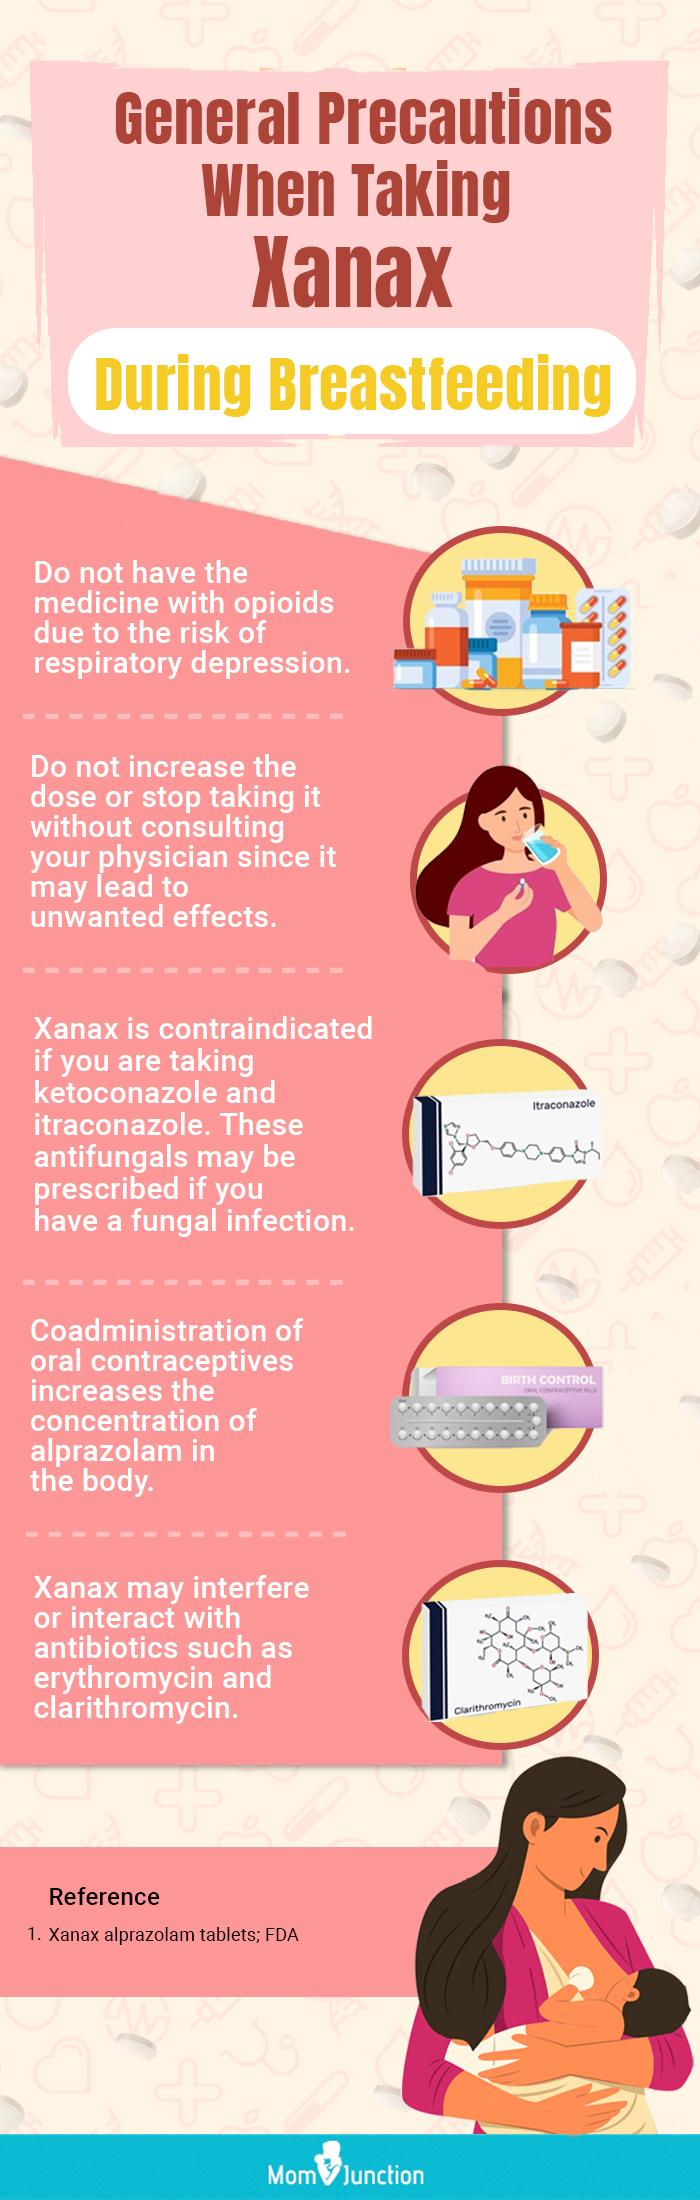 precautions when taking xanax during breastfeeding (infographic)